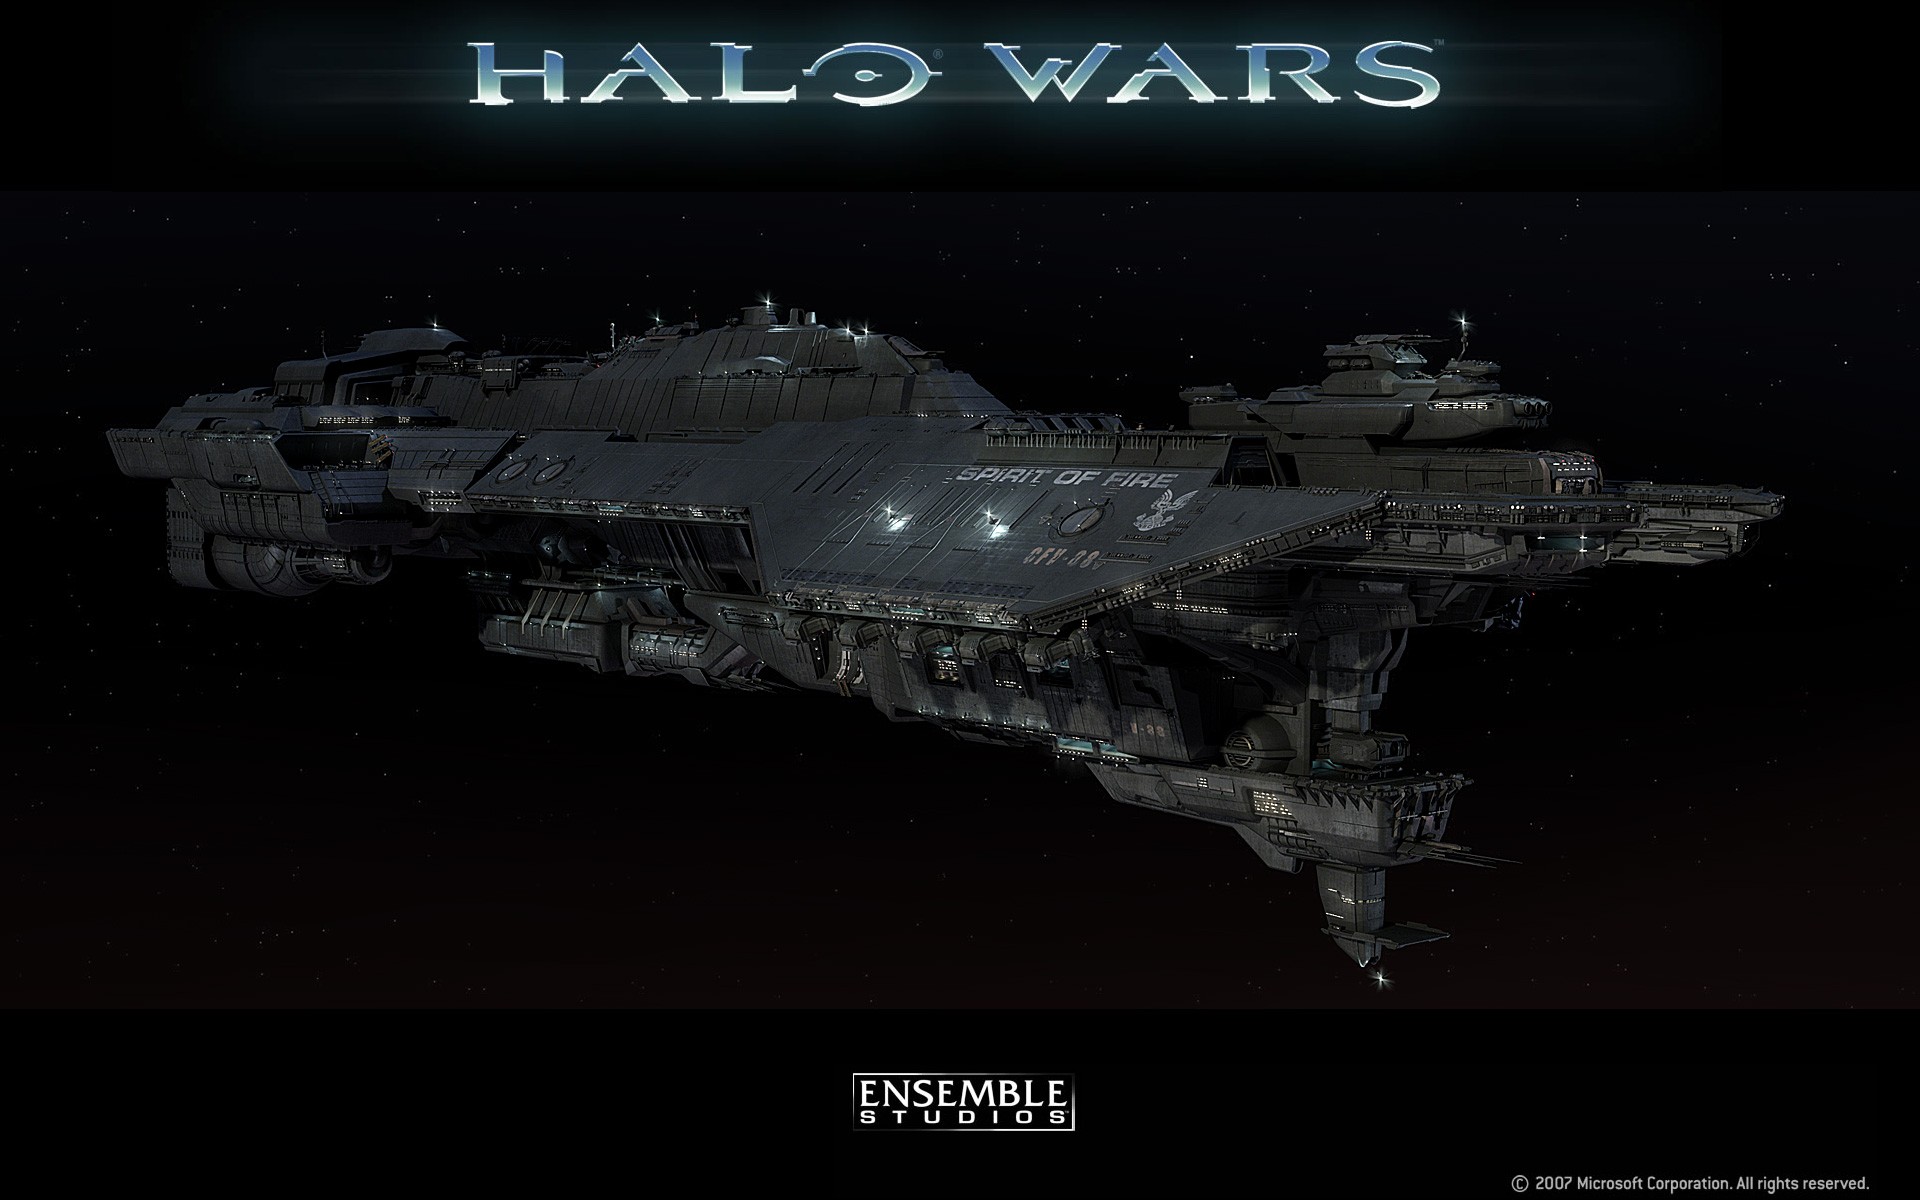 General 1920x1200 science fiction video games Halo Wars spaceship vehicle video game art 2007 (Year)